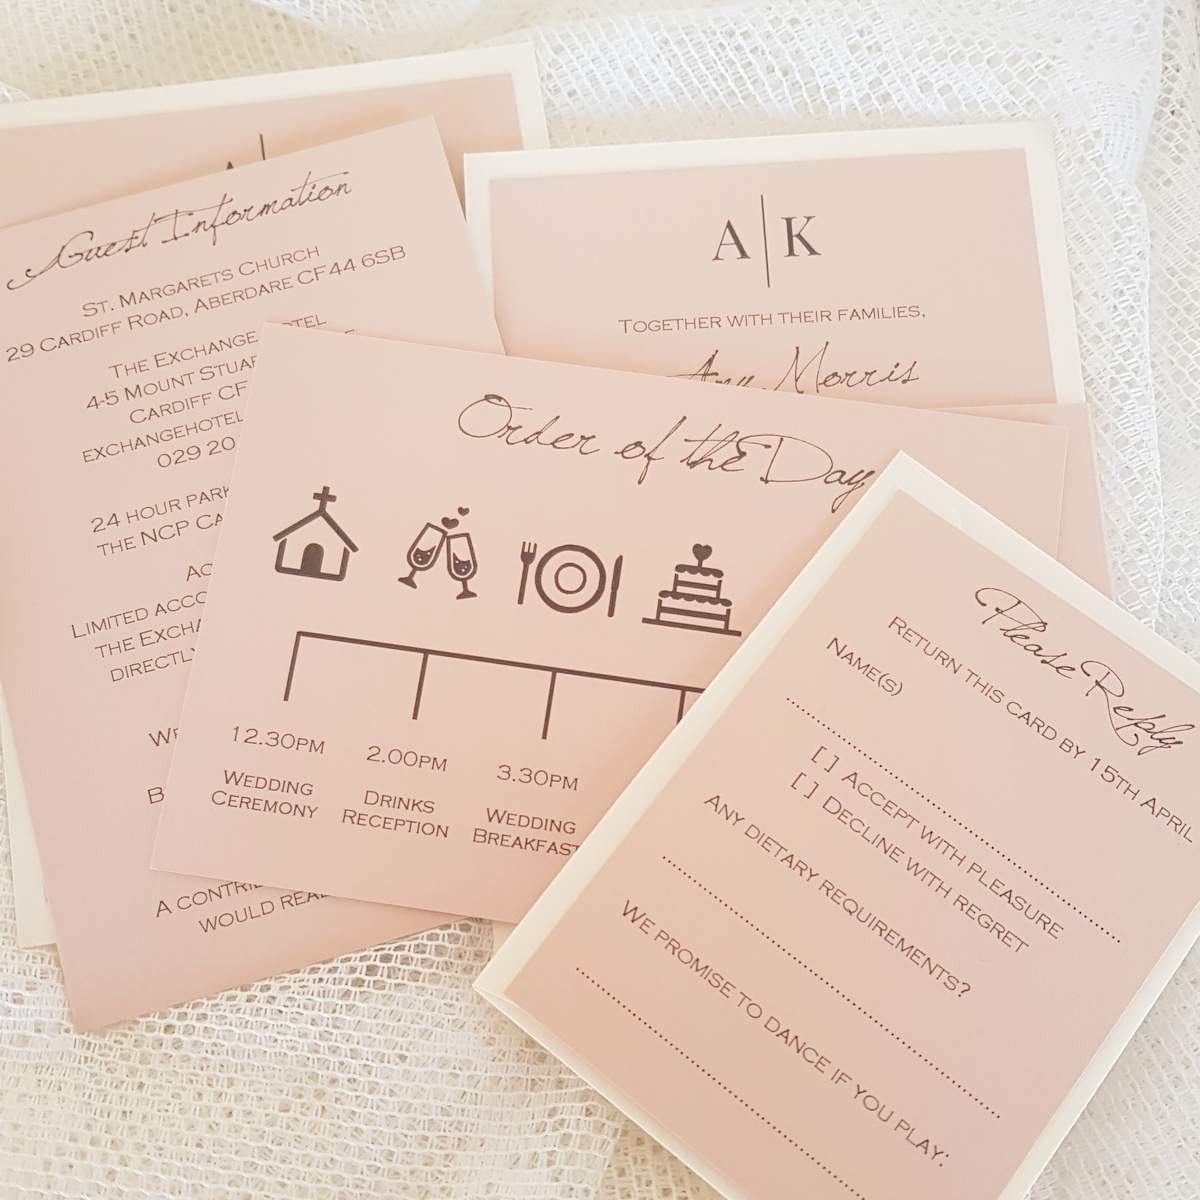 blush wedding invitation with an order of the day timeline